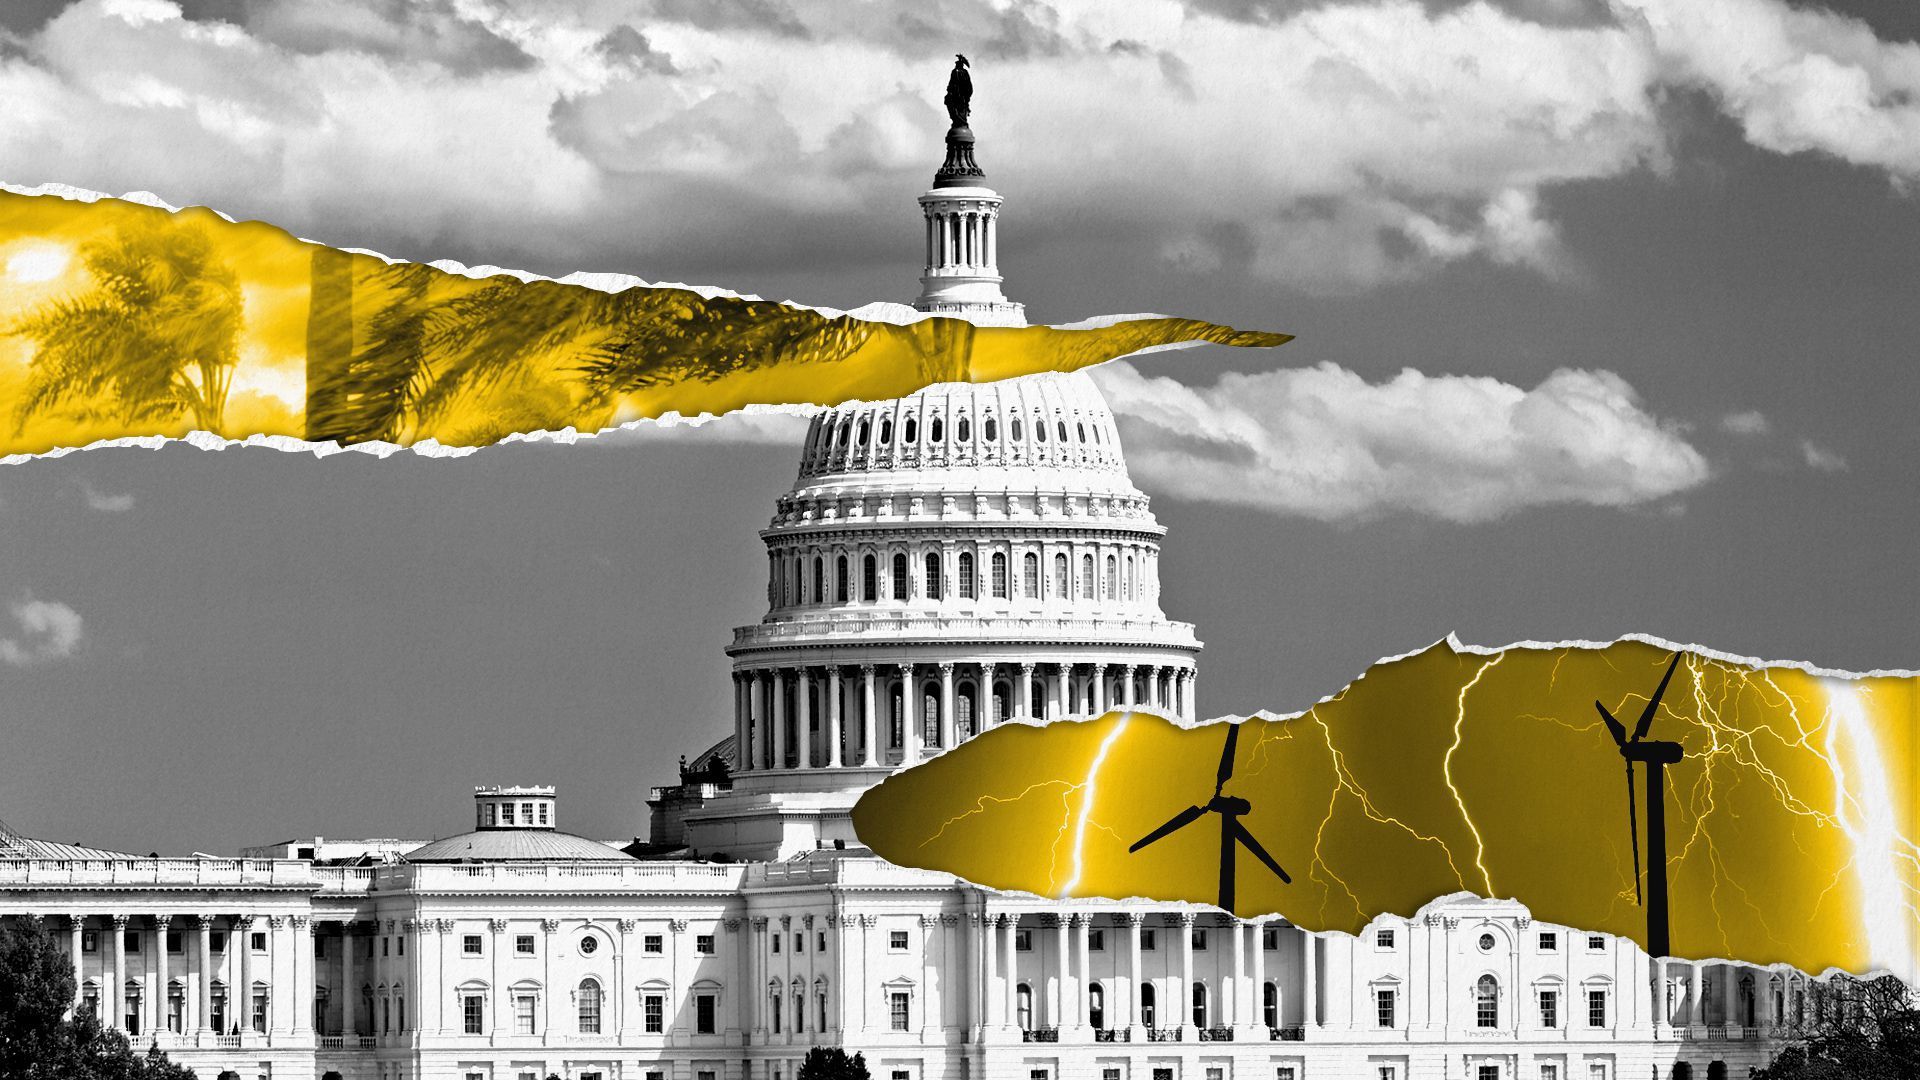 Illustration of the U.S. Capitol with images of wind turbines in front.